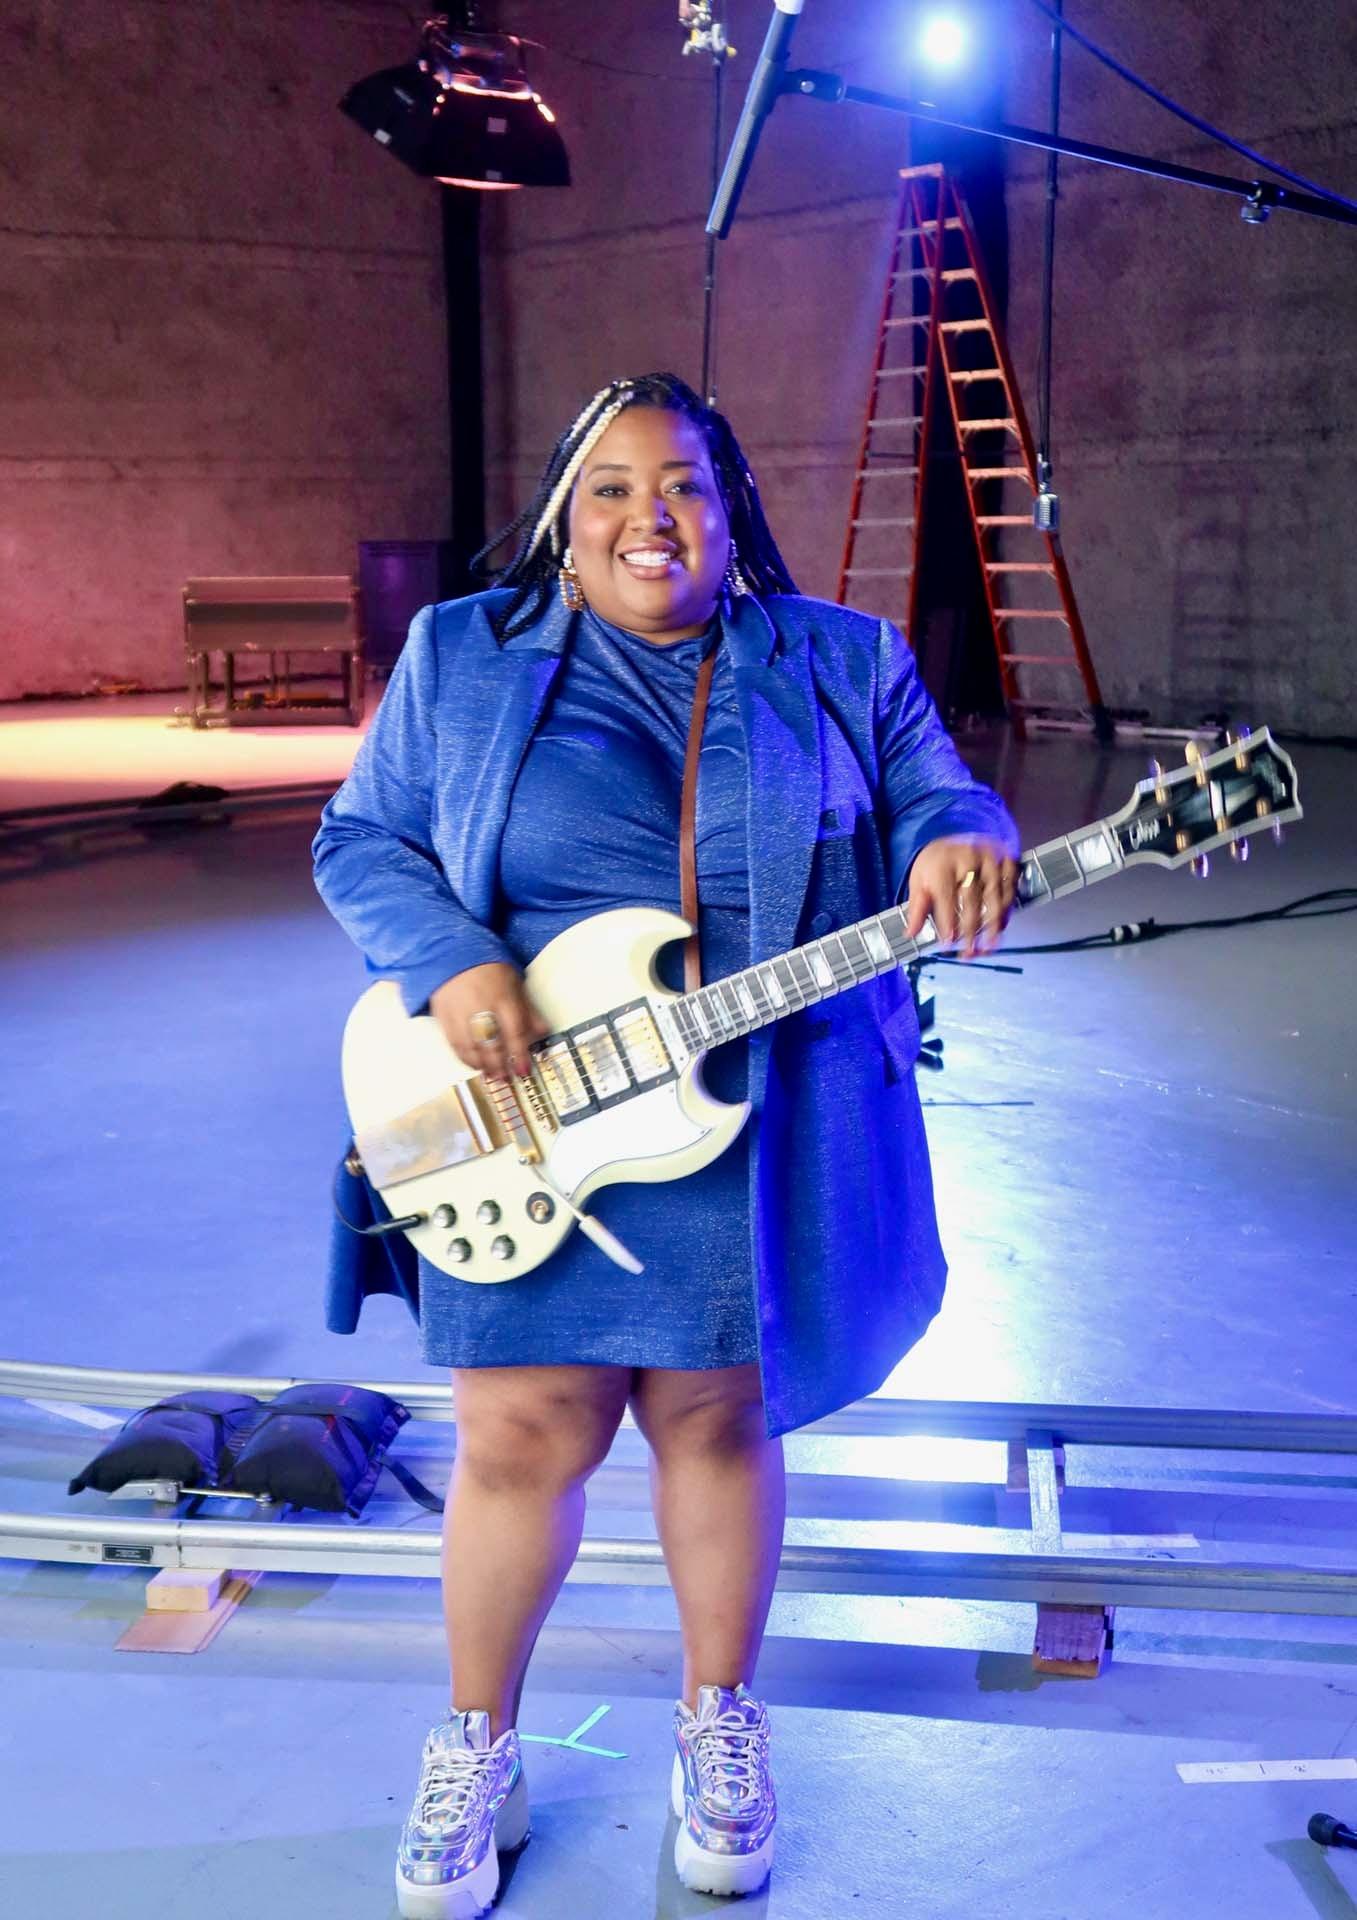 Celisse Henderson poses for a photo with her guitar on the set of GOSPEL